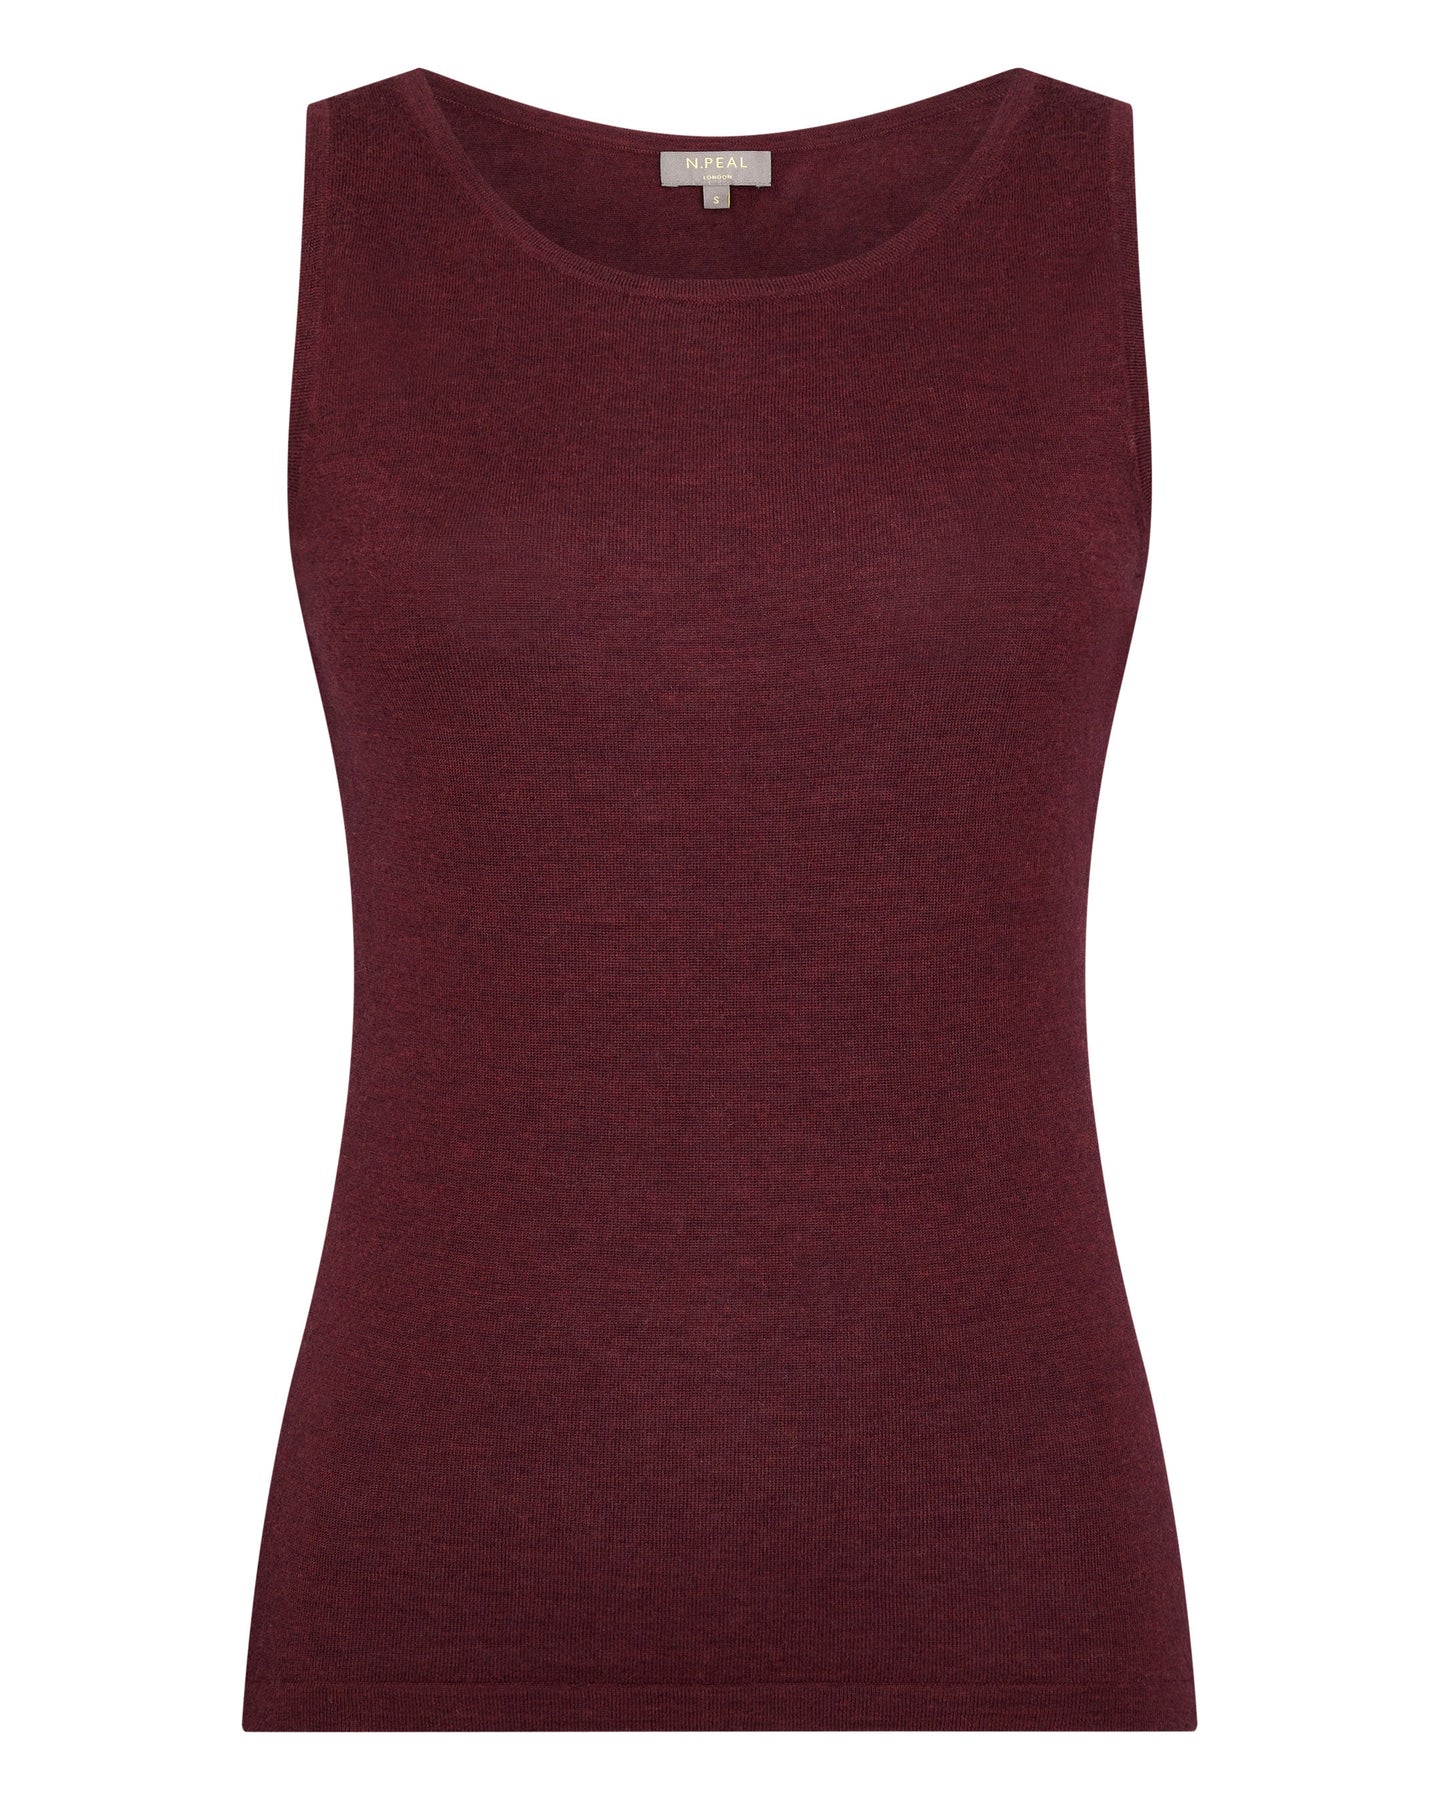 N.Peal Women's Superfine Cashmere Shell Top Burgundy Red